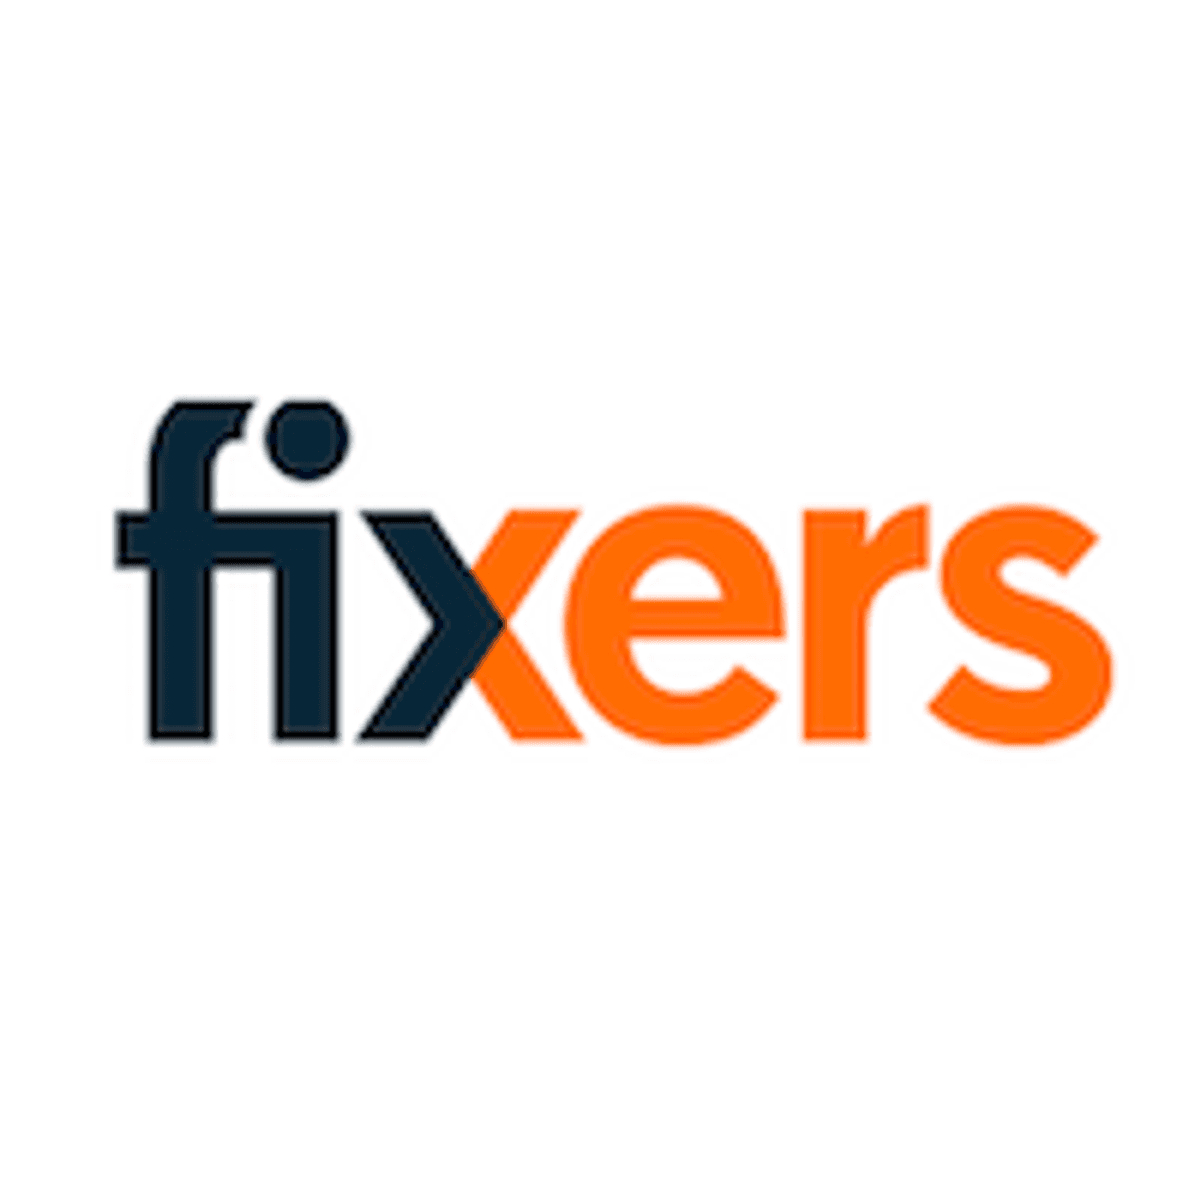 Fixers is geopend in Almere image